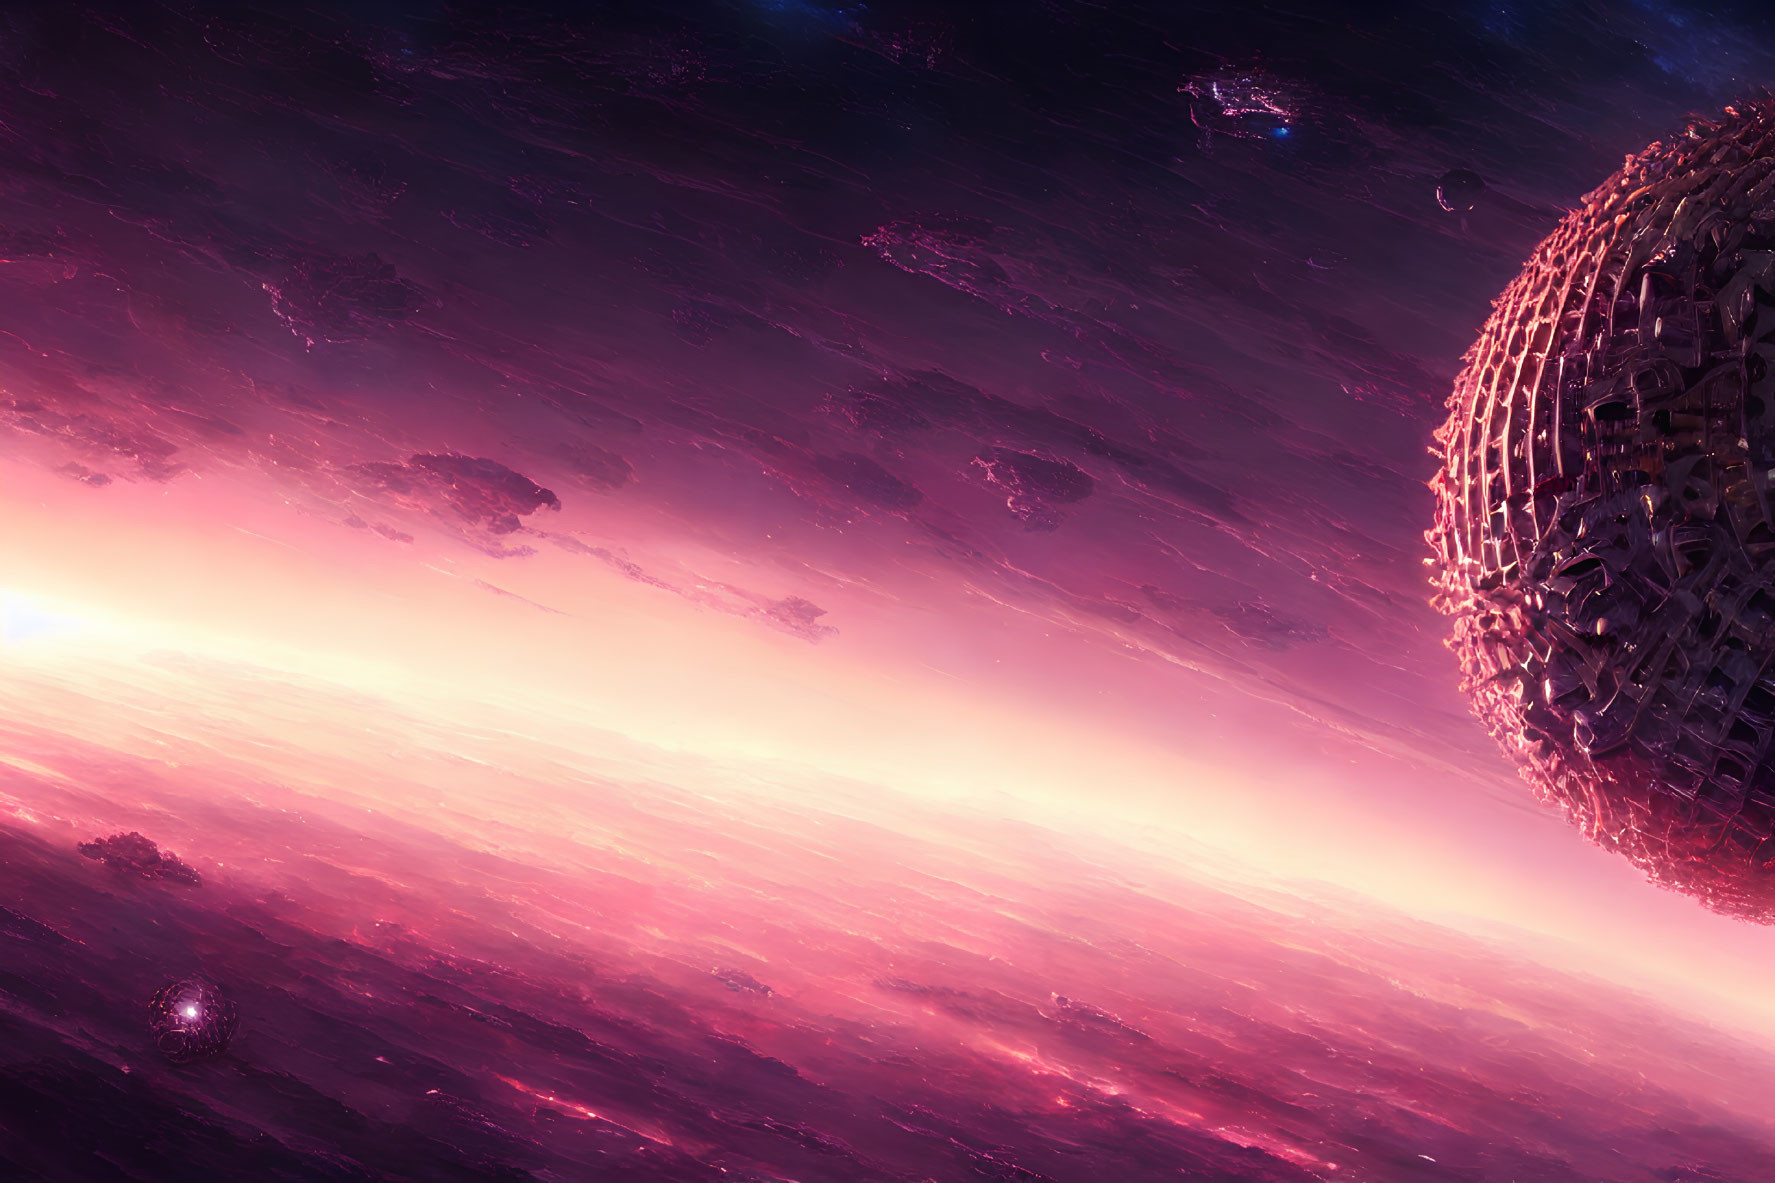 Starlit pink and purple nebula with detailed spherical structure in cosmic scene